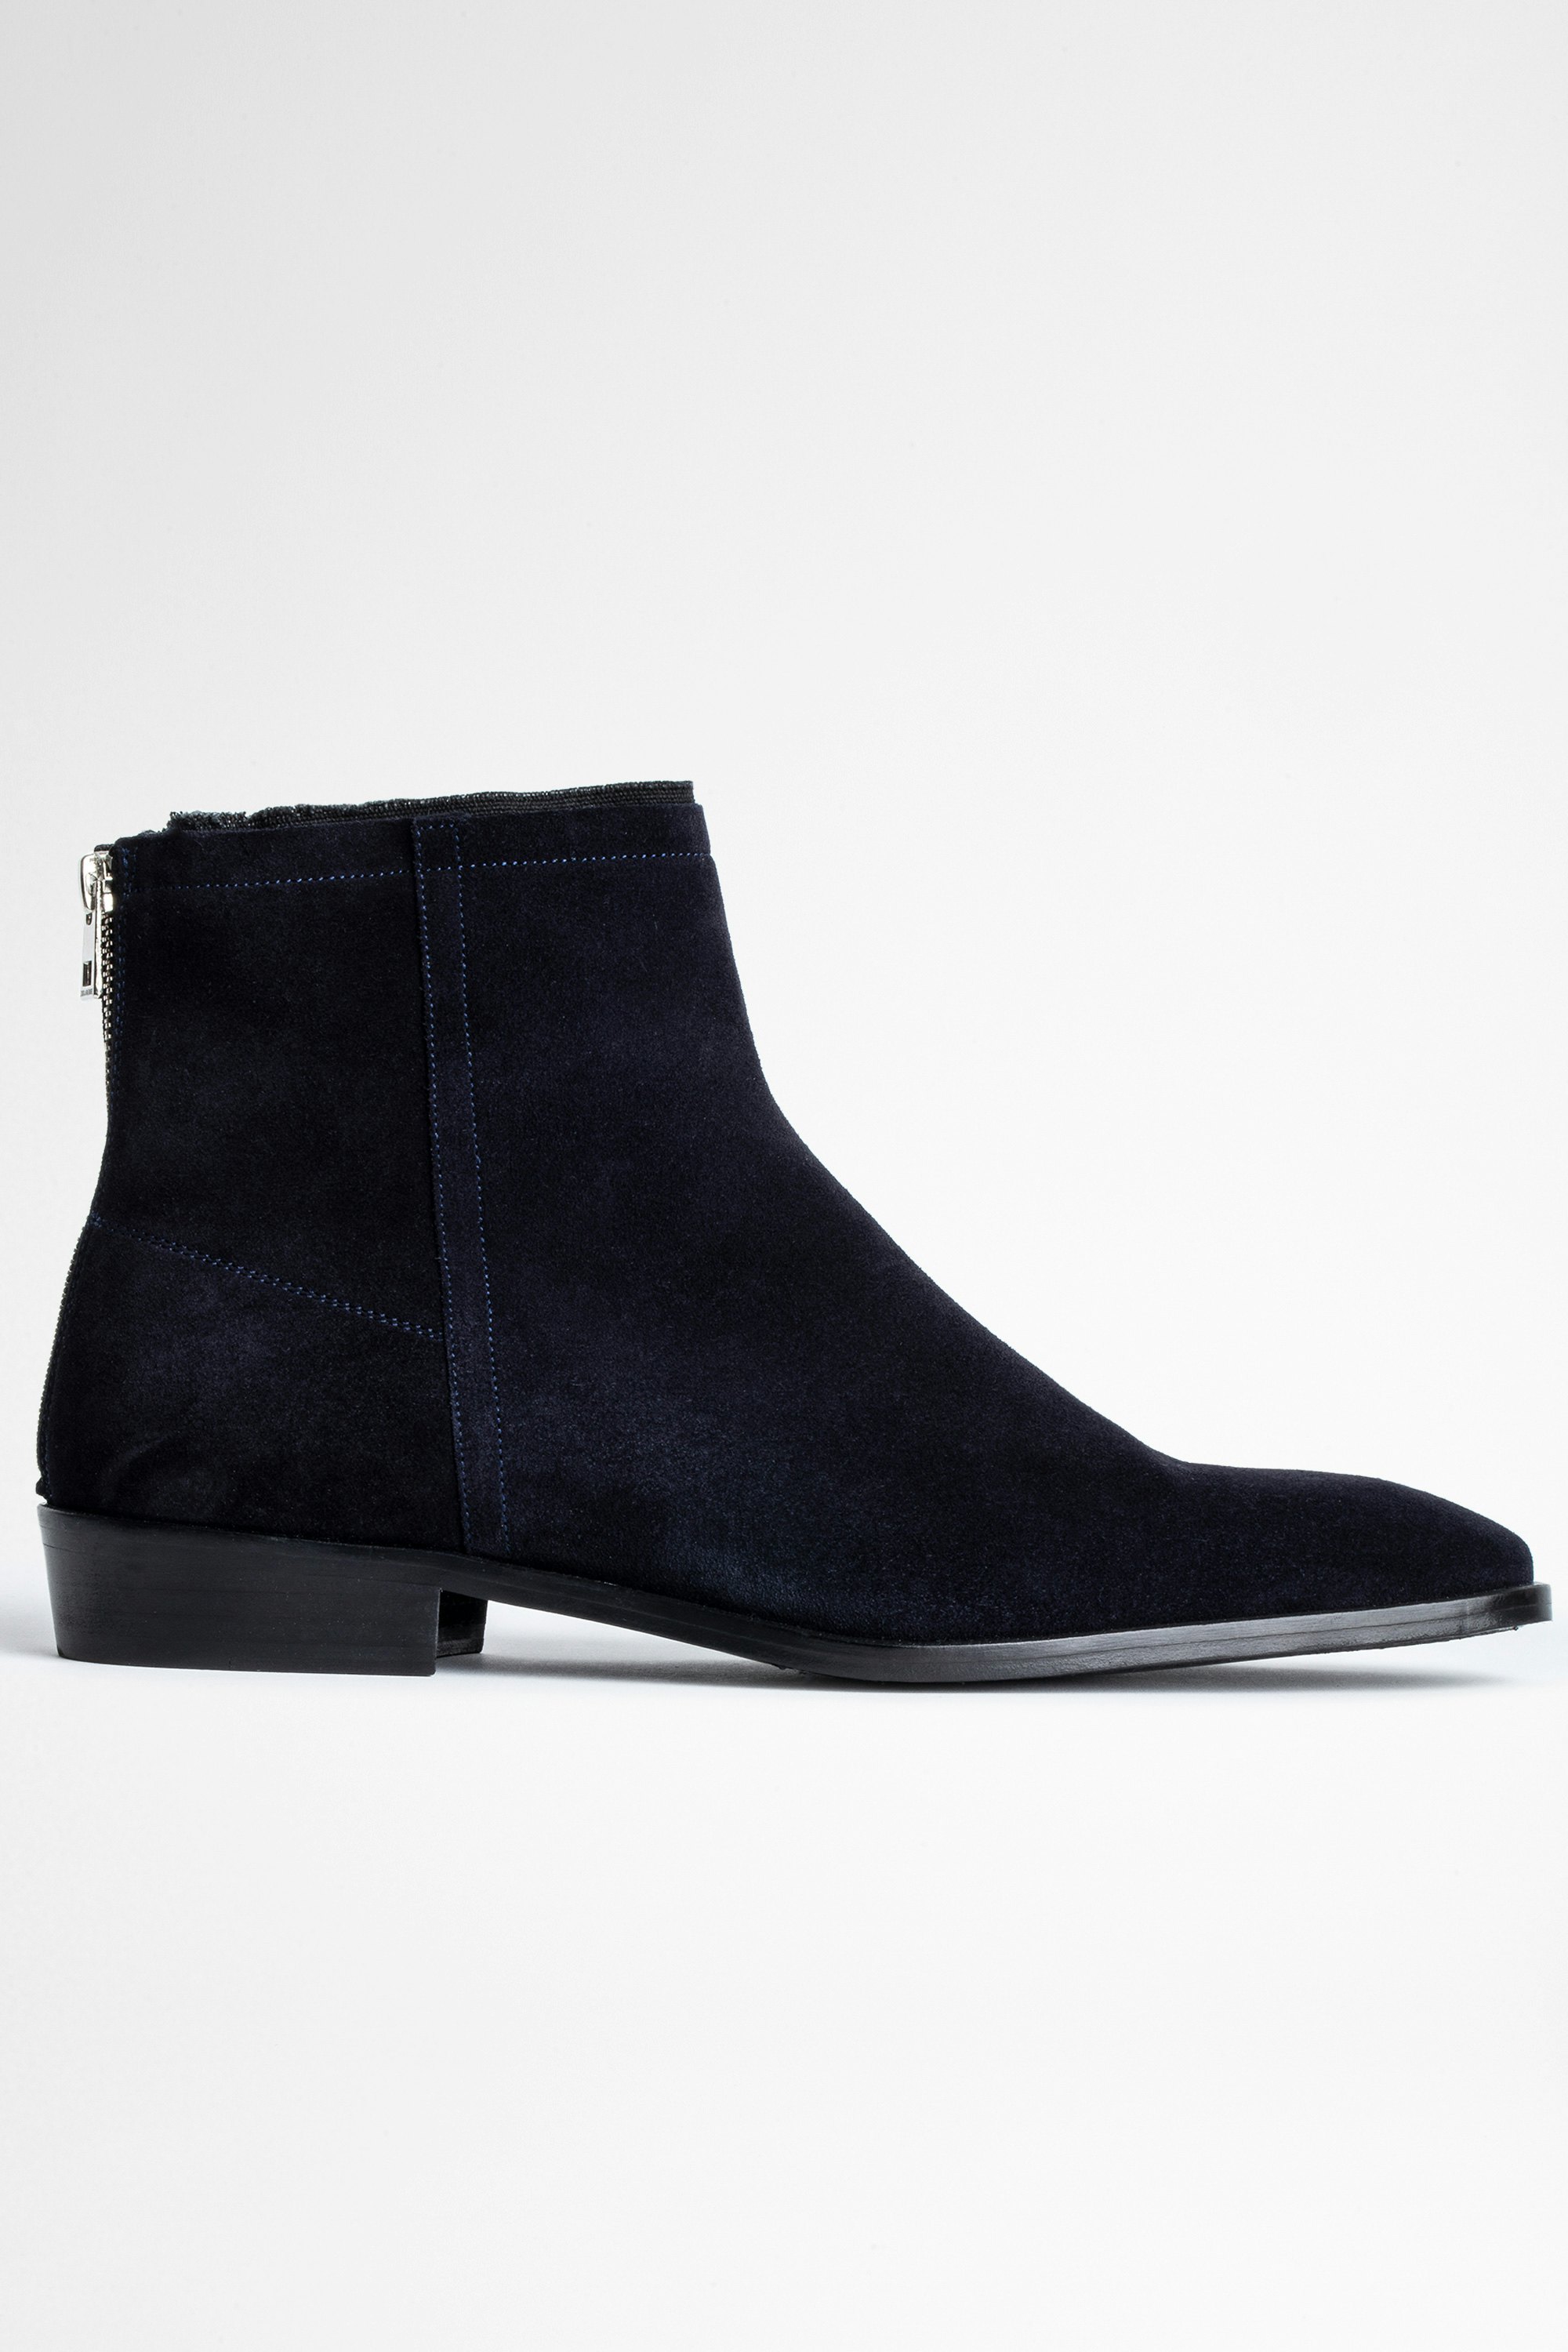 Romare Suede Ankle レザーブーツ  Men's navy blue suede ankle boots